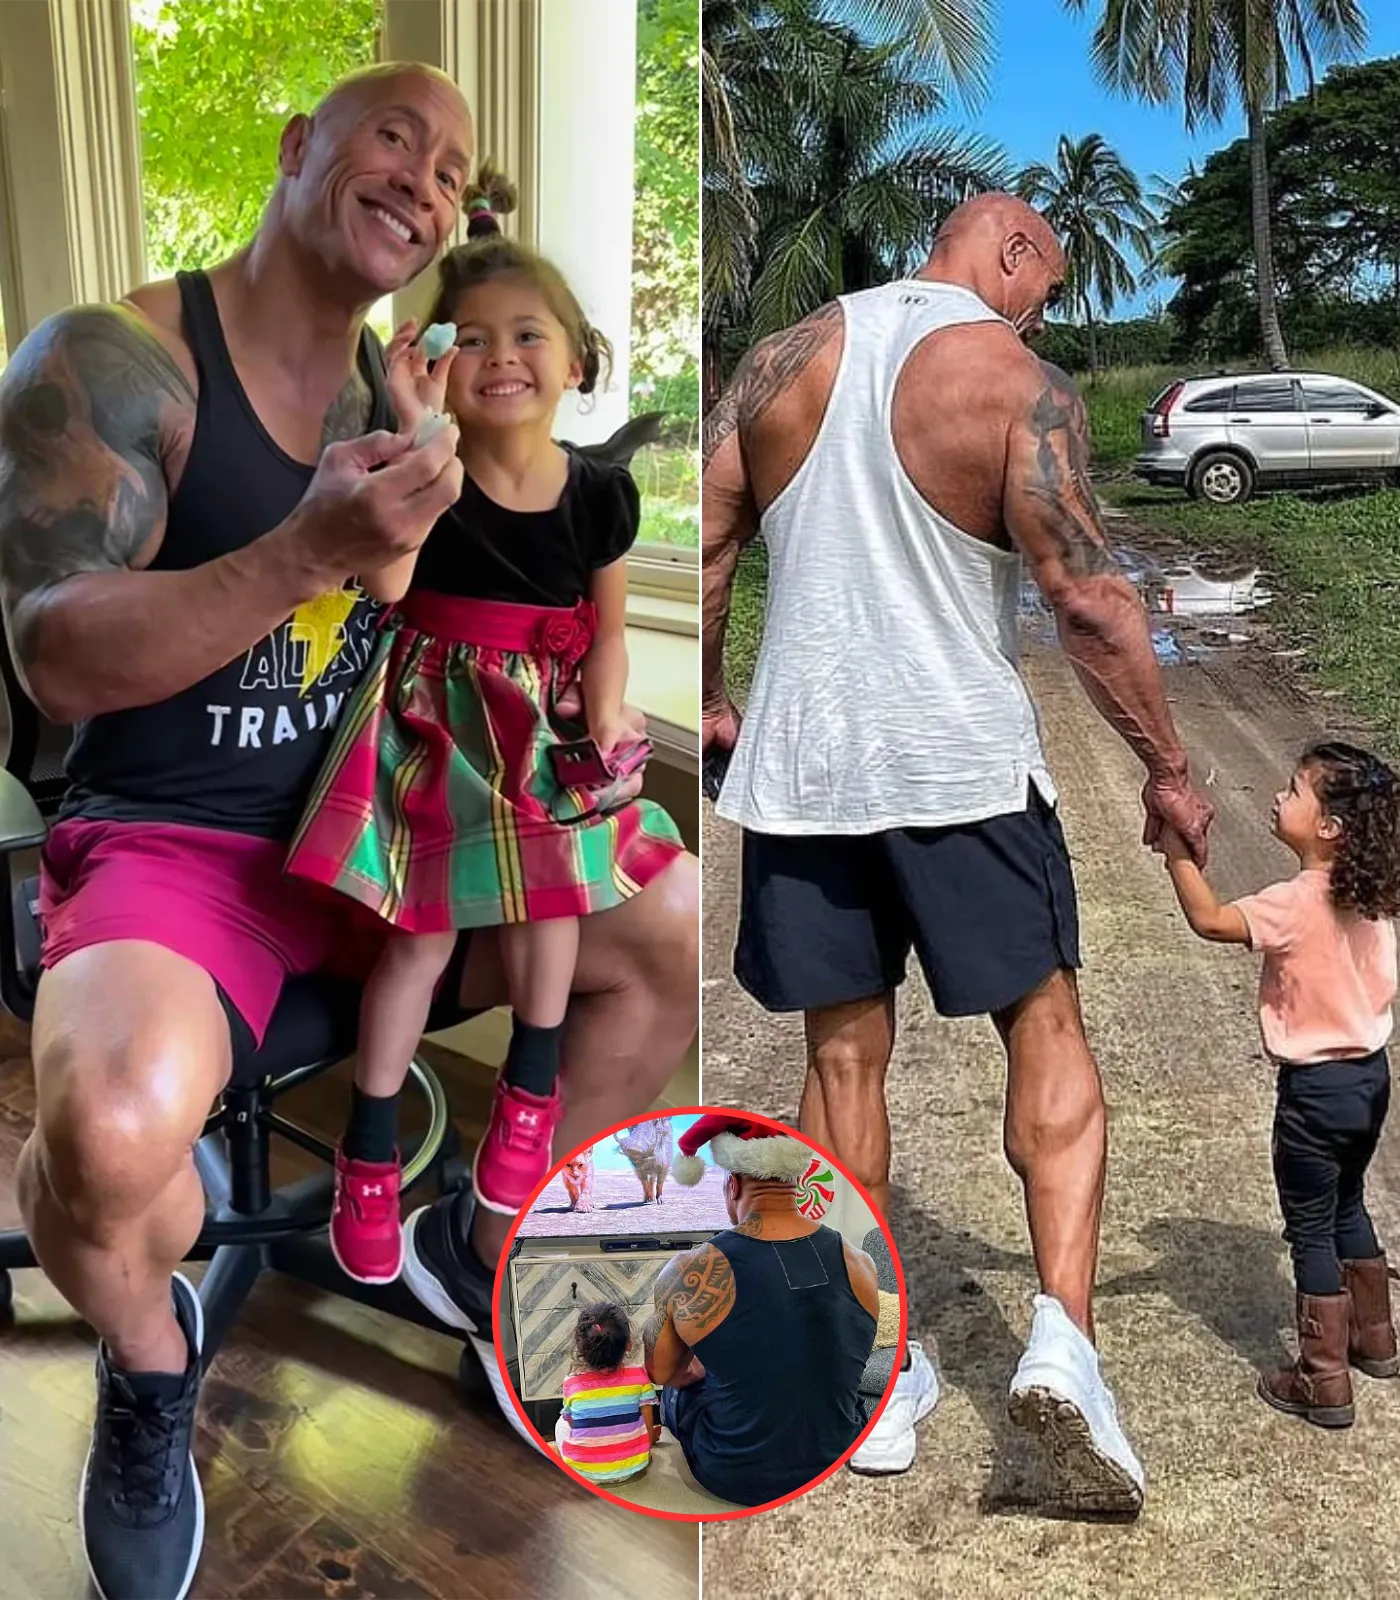 Have A Look At 'Dwayne The Rock Johnson's Adorable Father-Daughter Moment